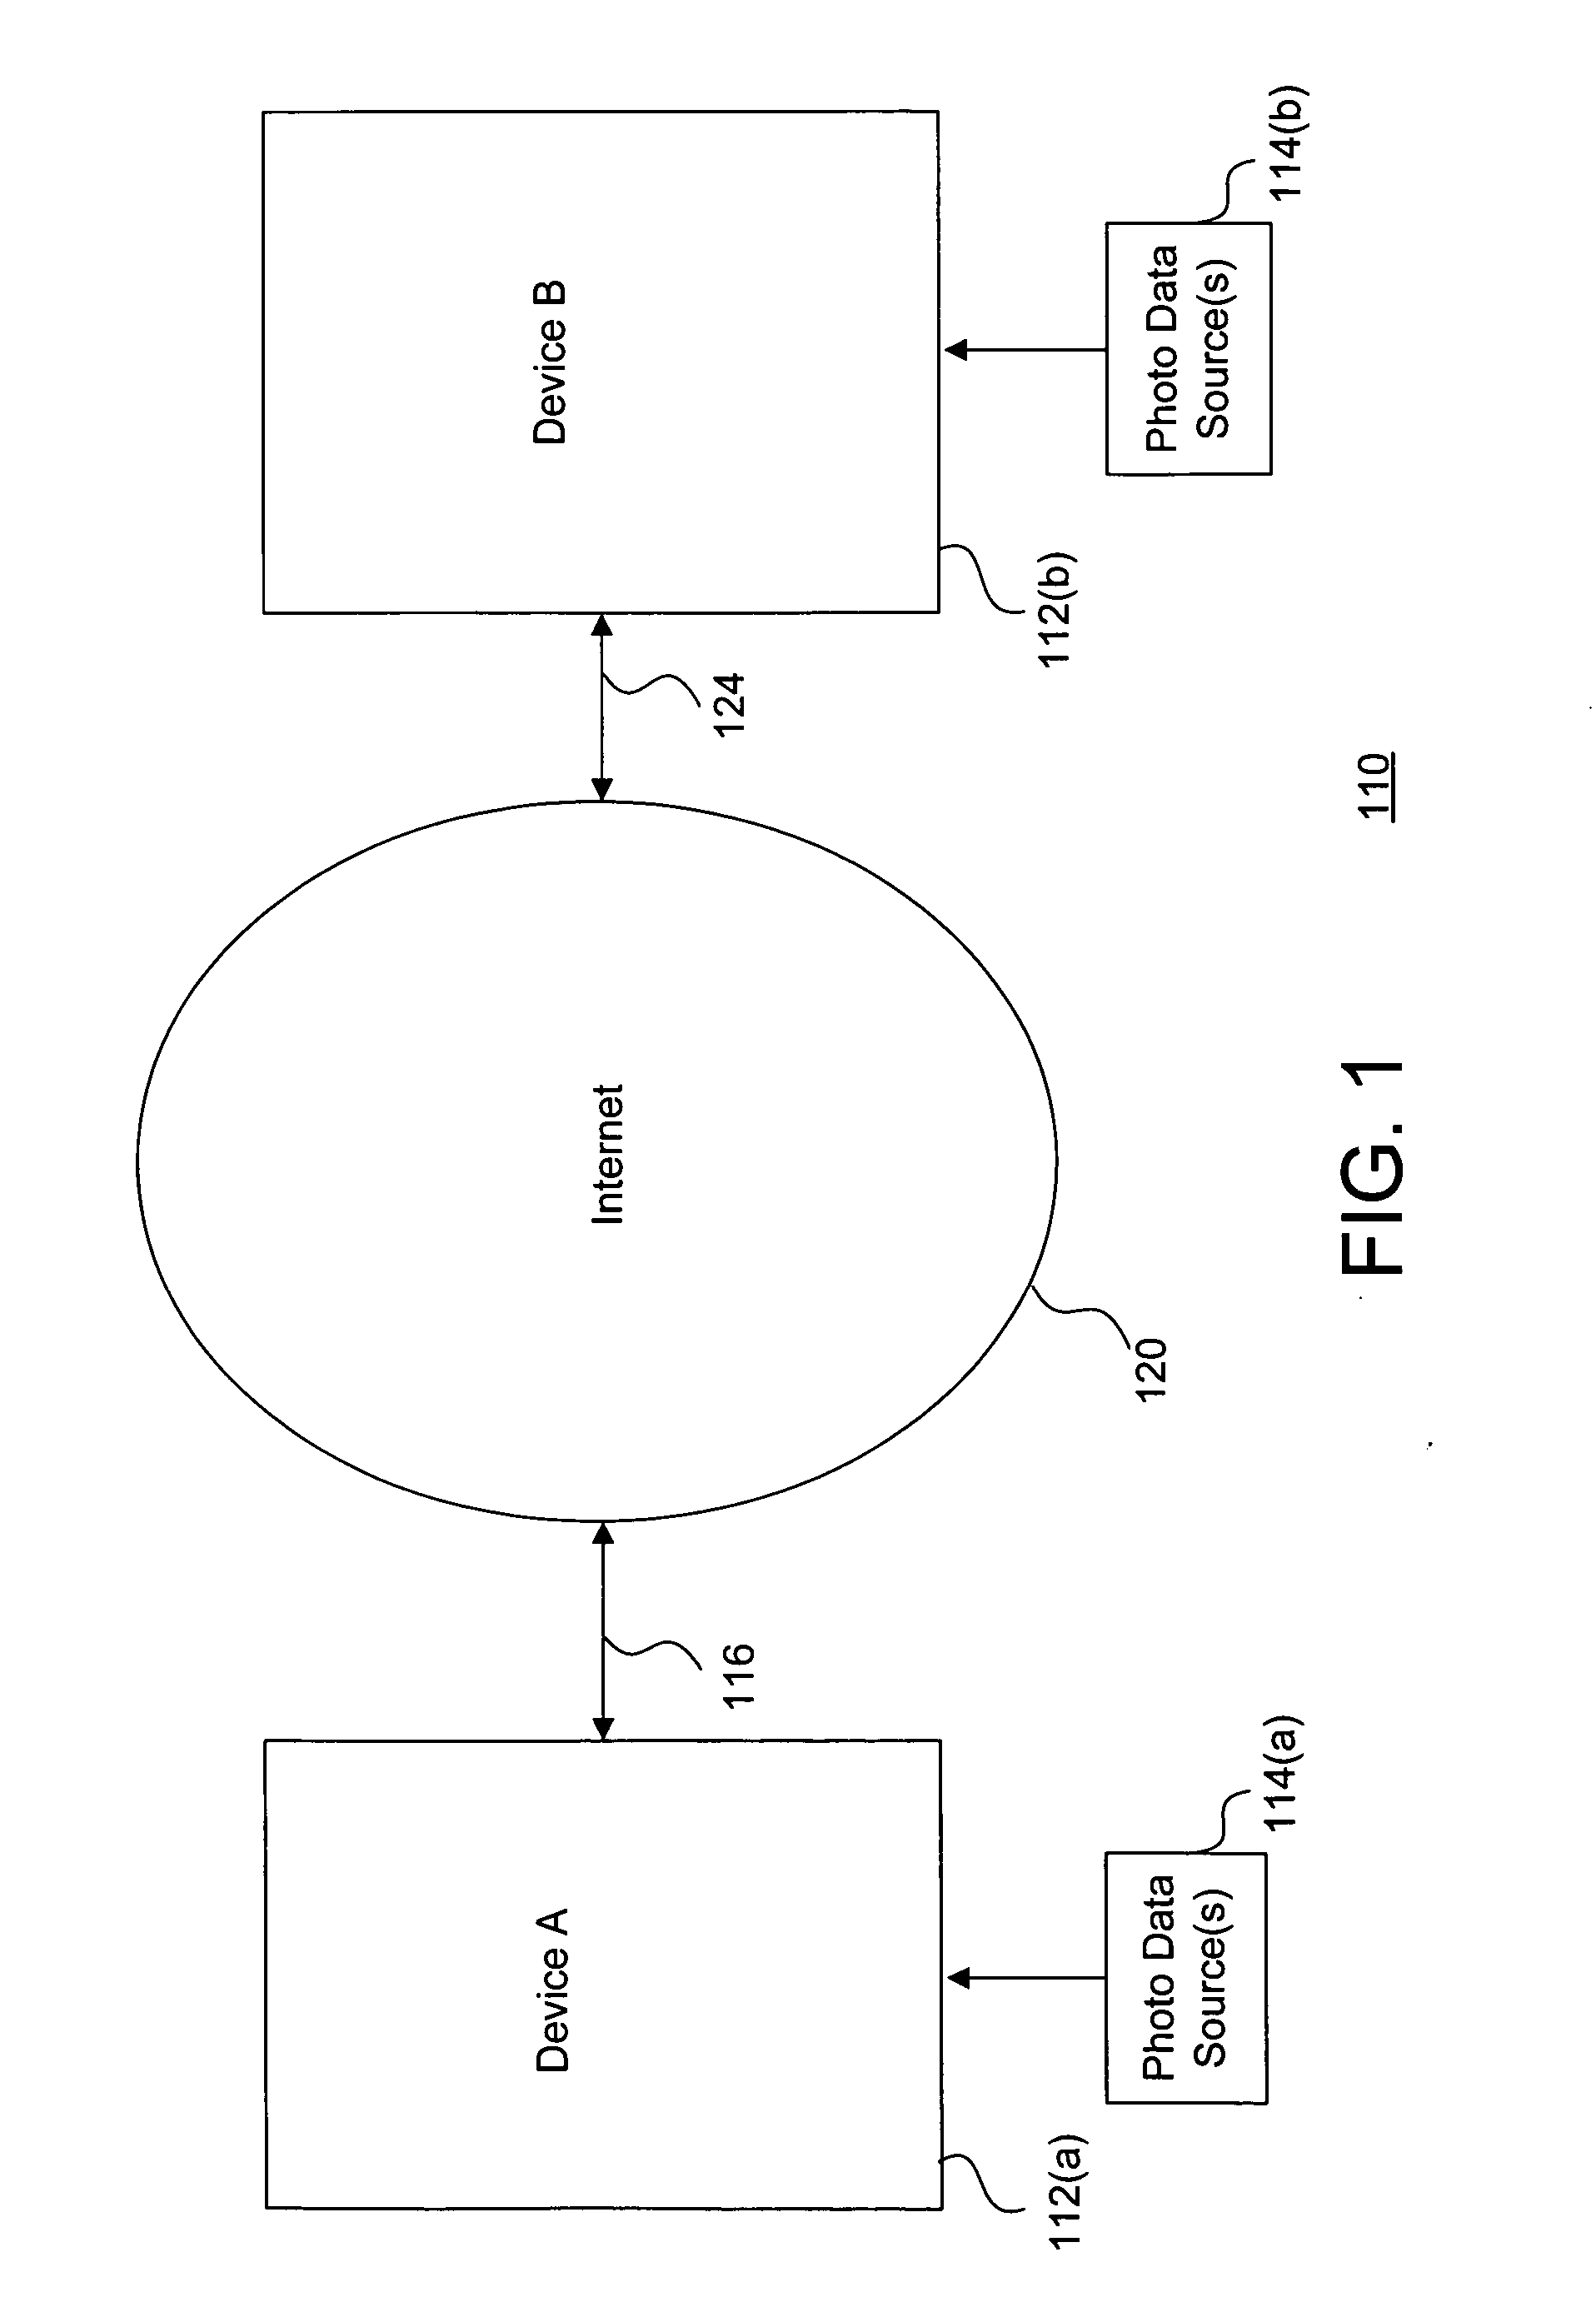 System and method for effectively exchanging photo data in an instant messaging environment